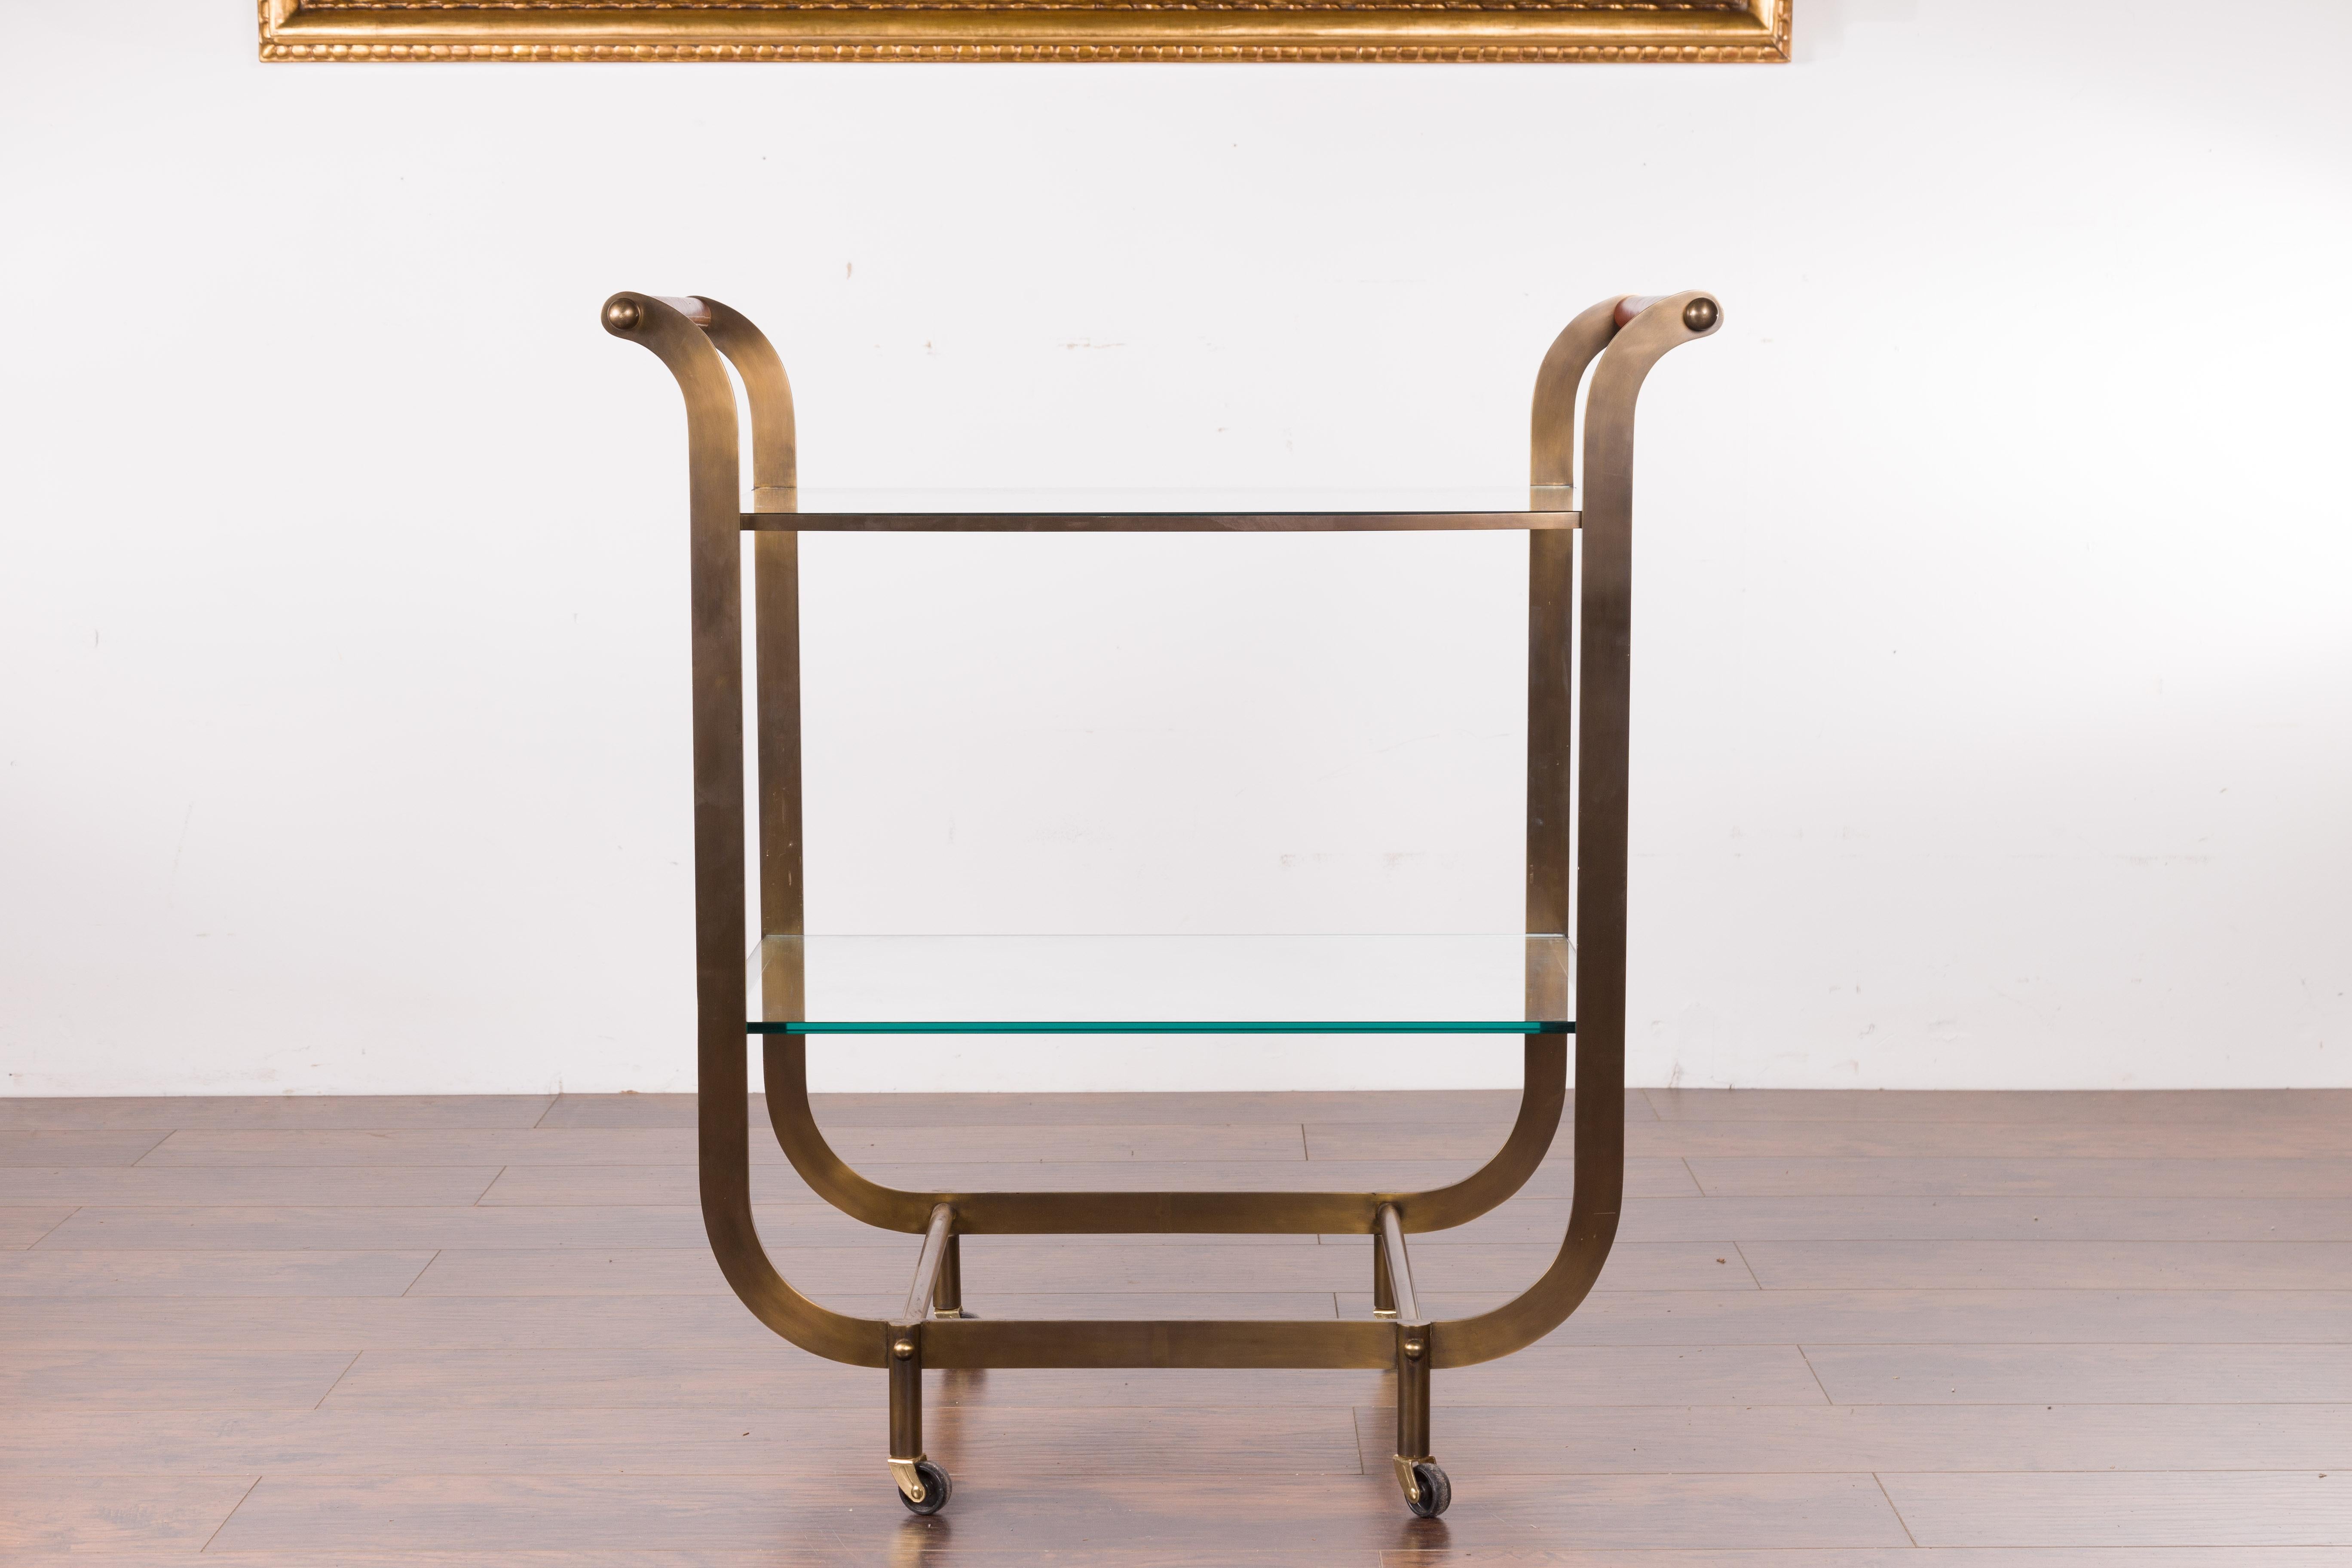 A French vintage brass tea cart from the mid-20th century with red leather handles and casters. Created in France during the mid-century period, this tea cart features delicately out-scrolling side supports accented with red leather handles.